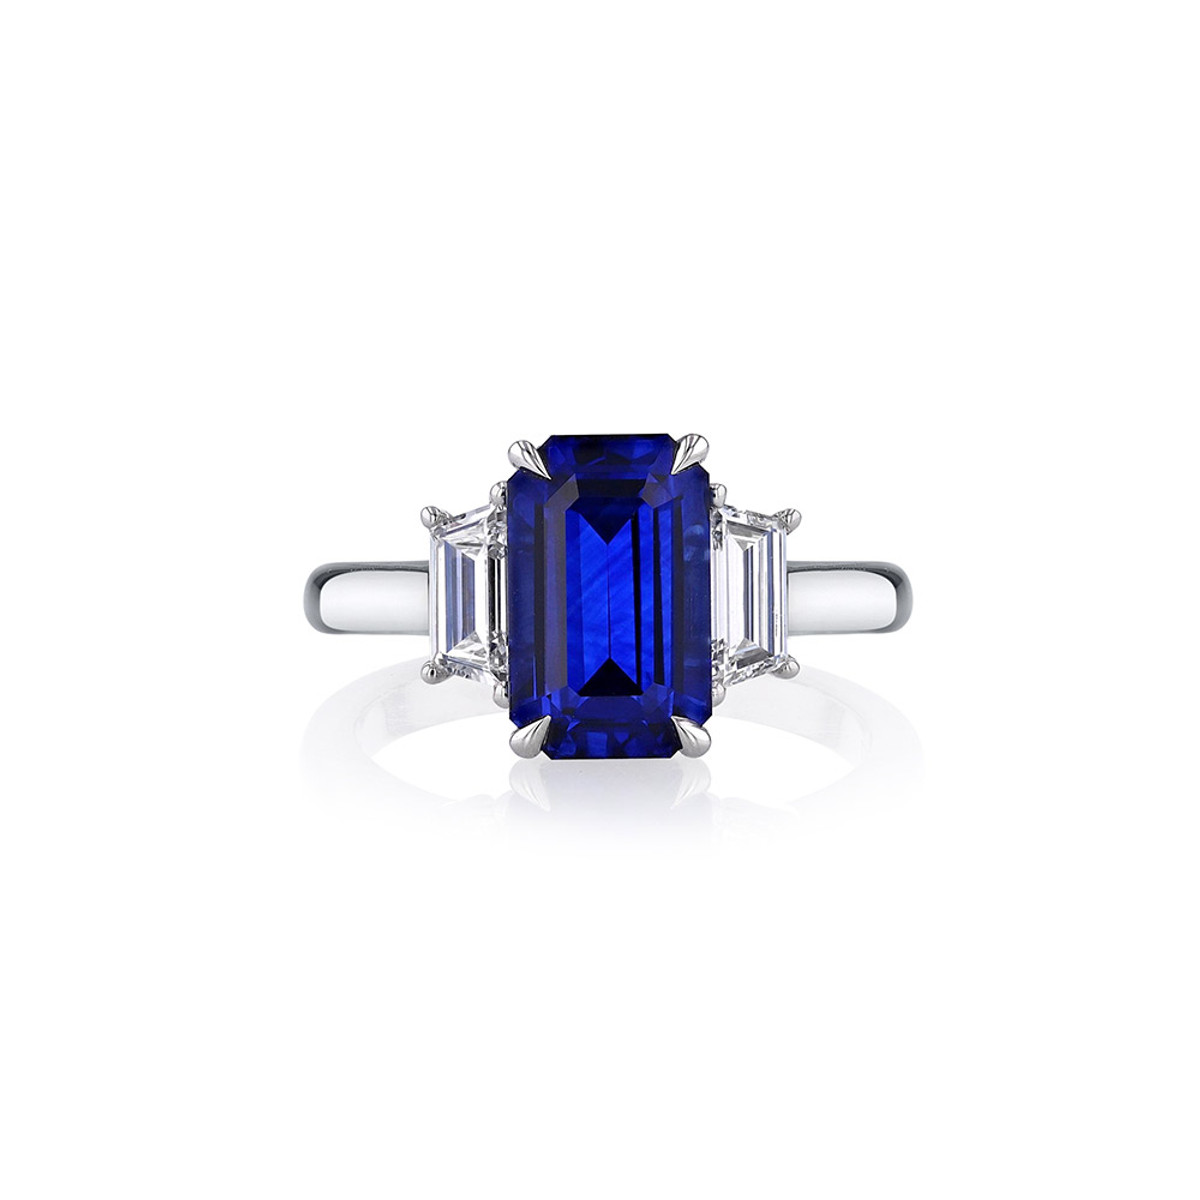 Hyde Park Collection Platinum Sapphire and Diamond Ring-58003 Product Image